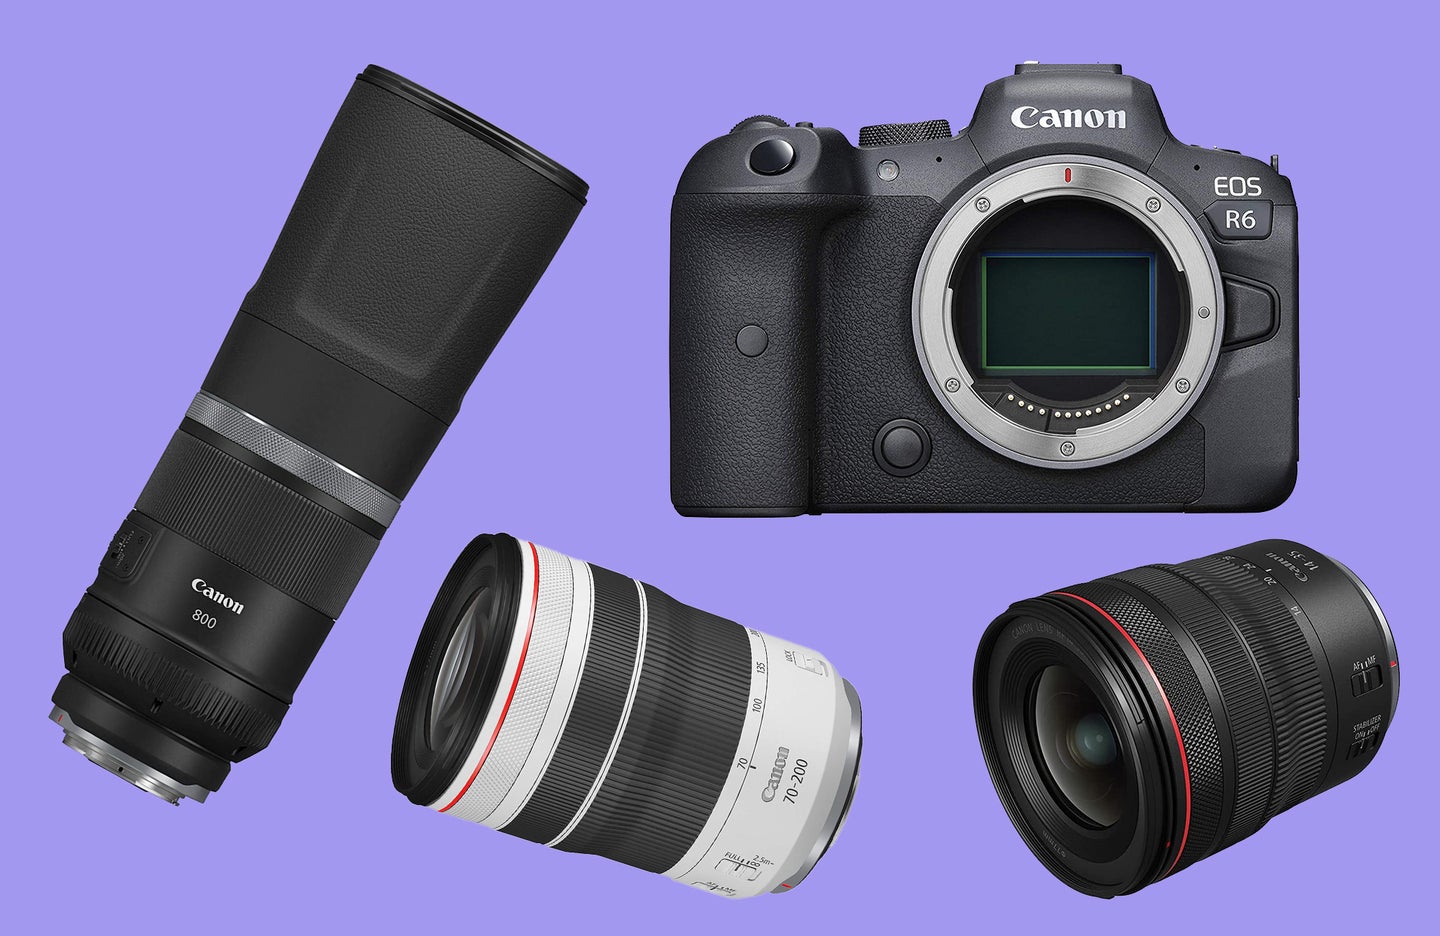 Canon camera and lenses on a purple background